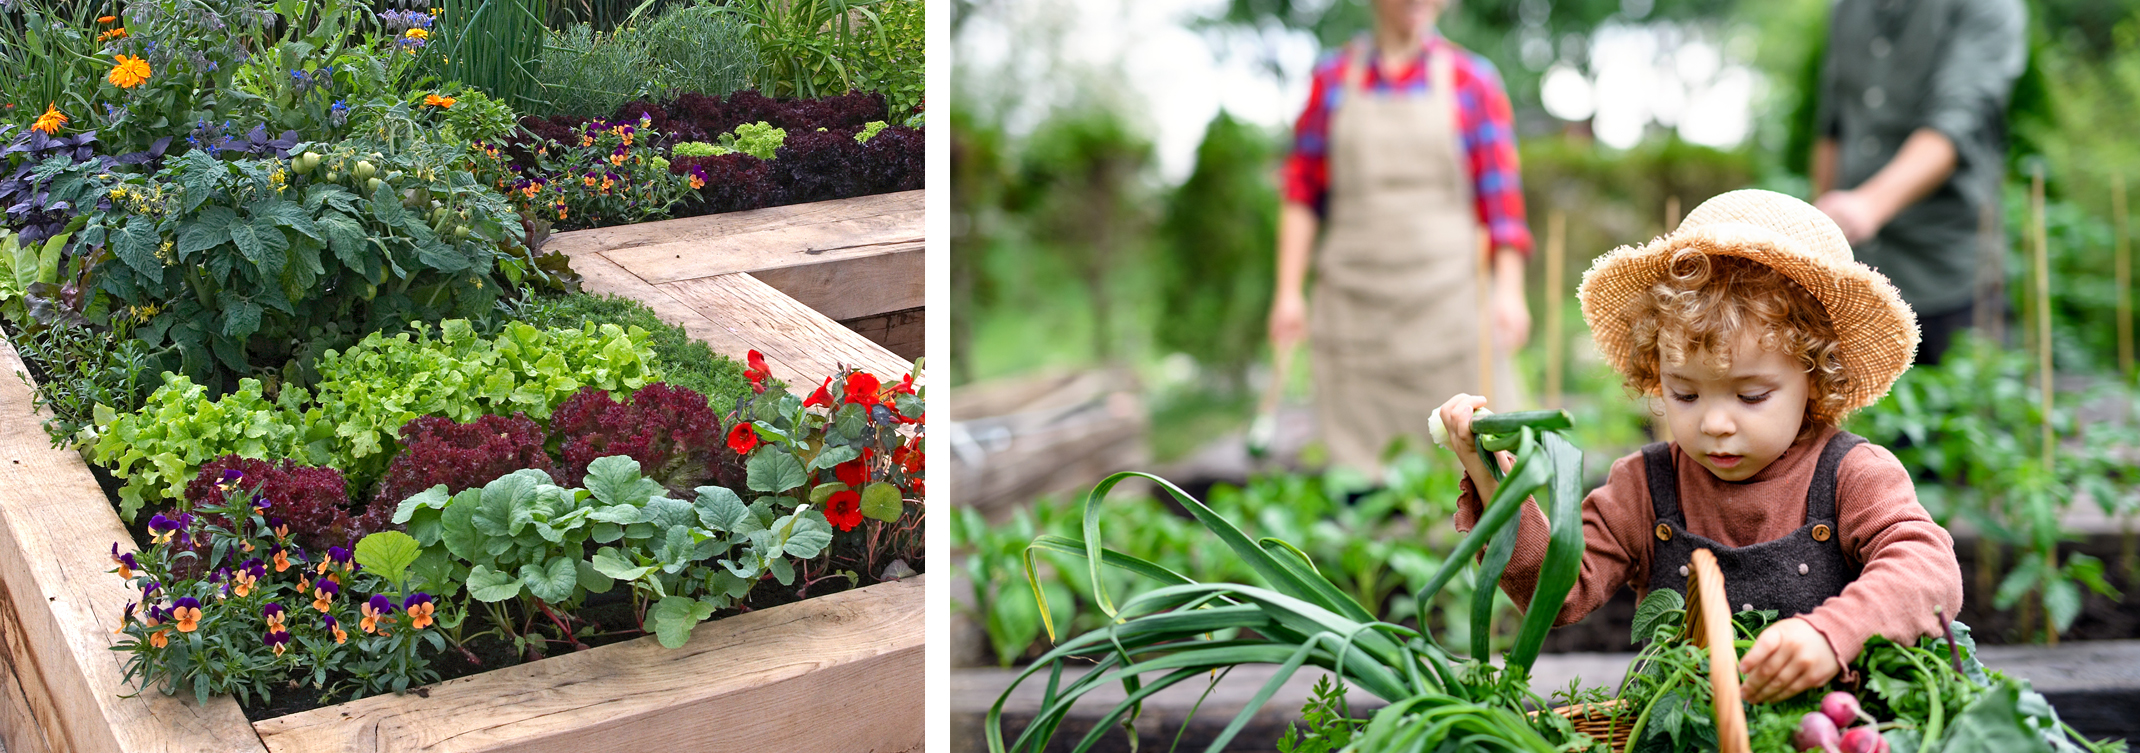 2 images with the first being a raised garden bed full of various lettuces and other edible plants, pansies and flowers and a second image of a child looking at fresh vegetables in a basket with adults blurred in the background standing in front of a raised garden bed